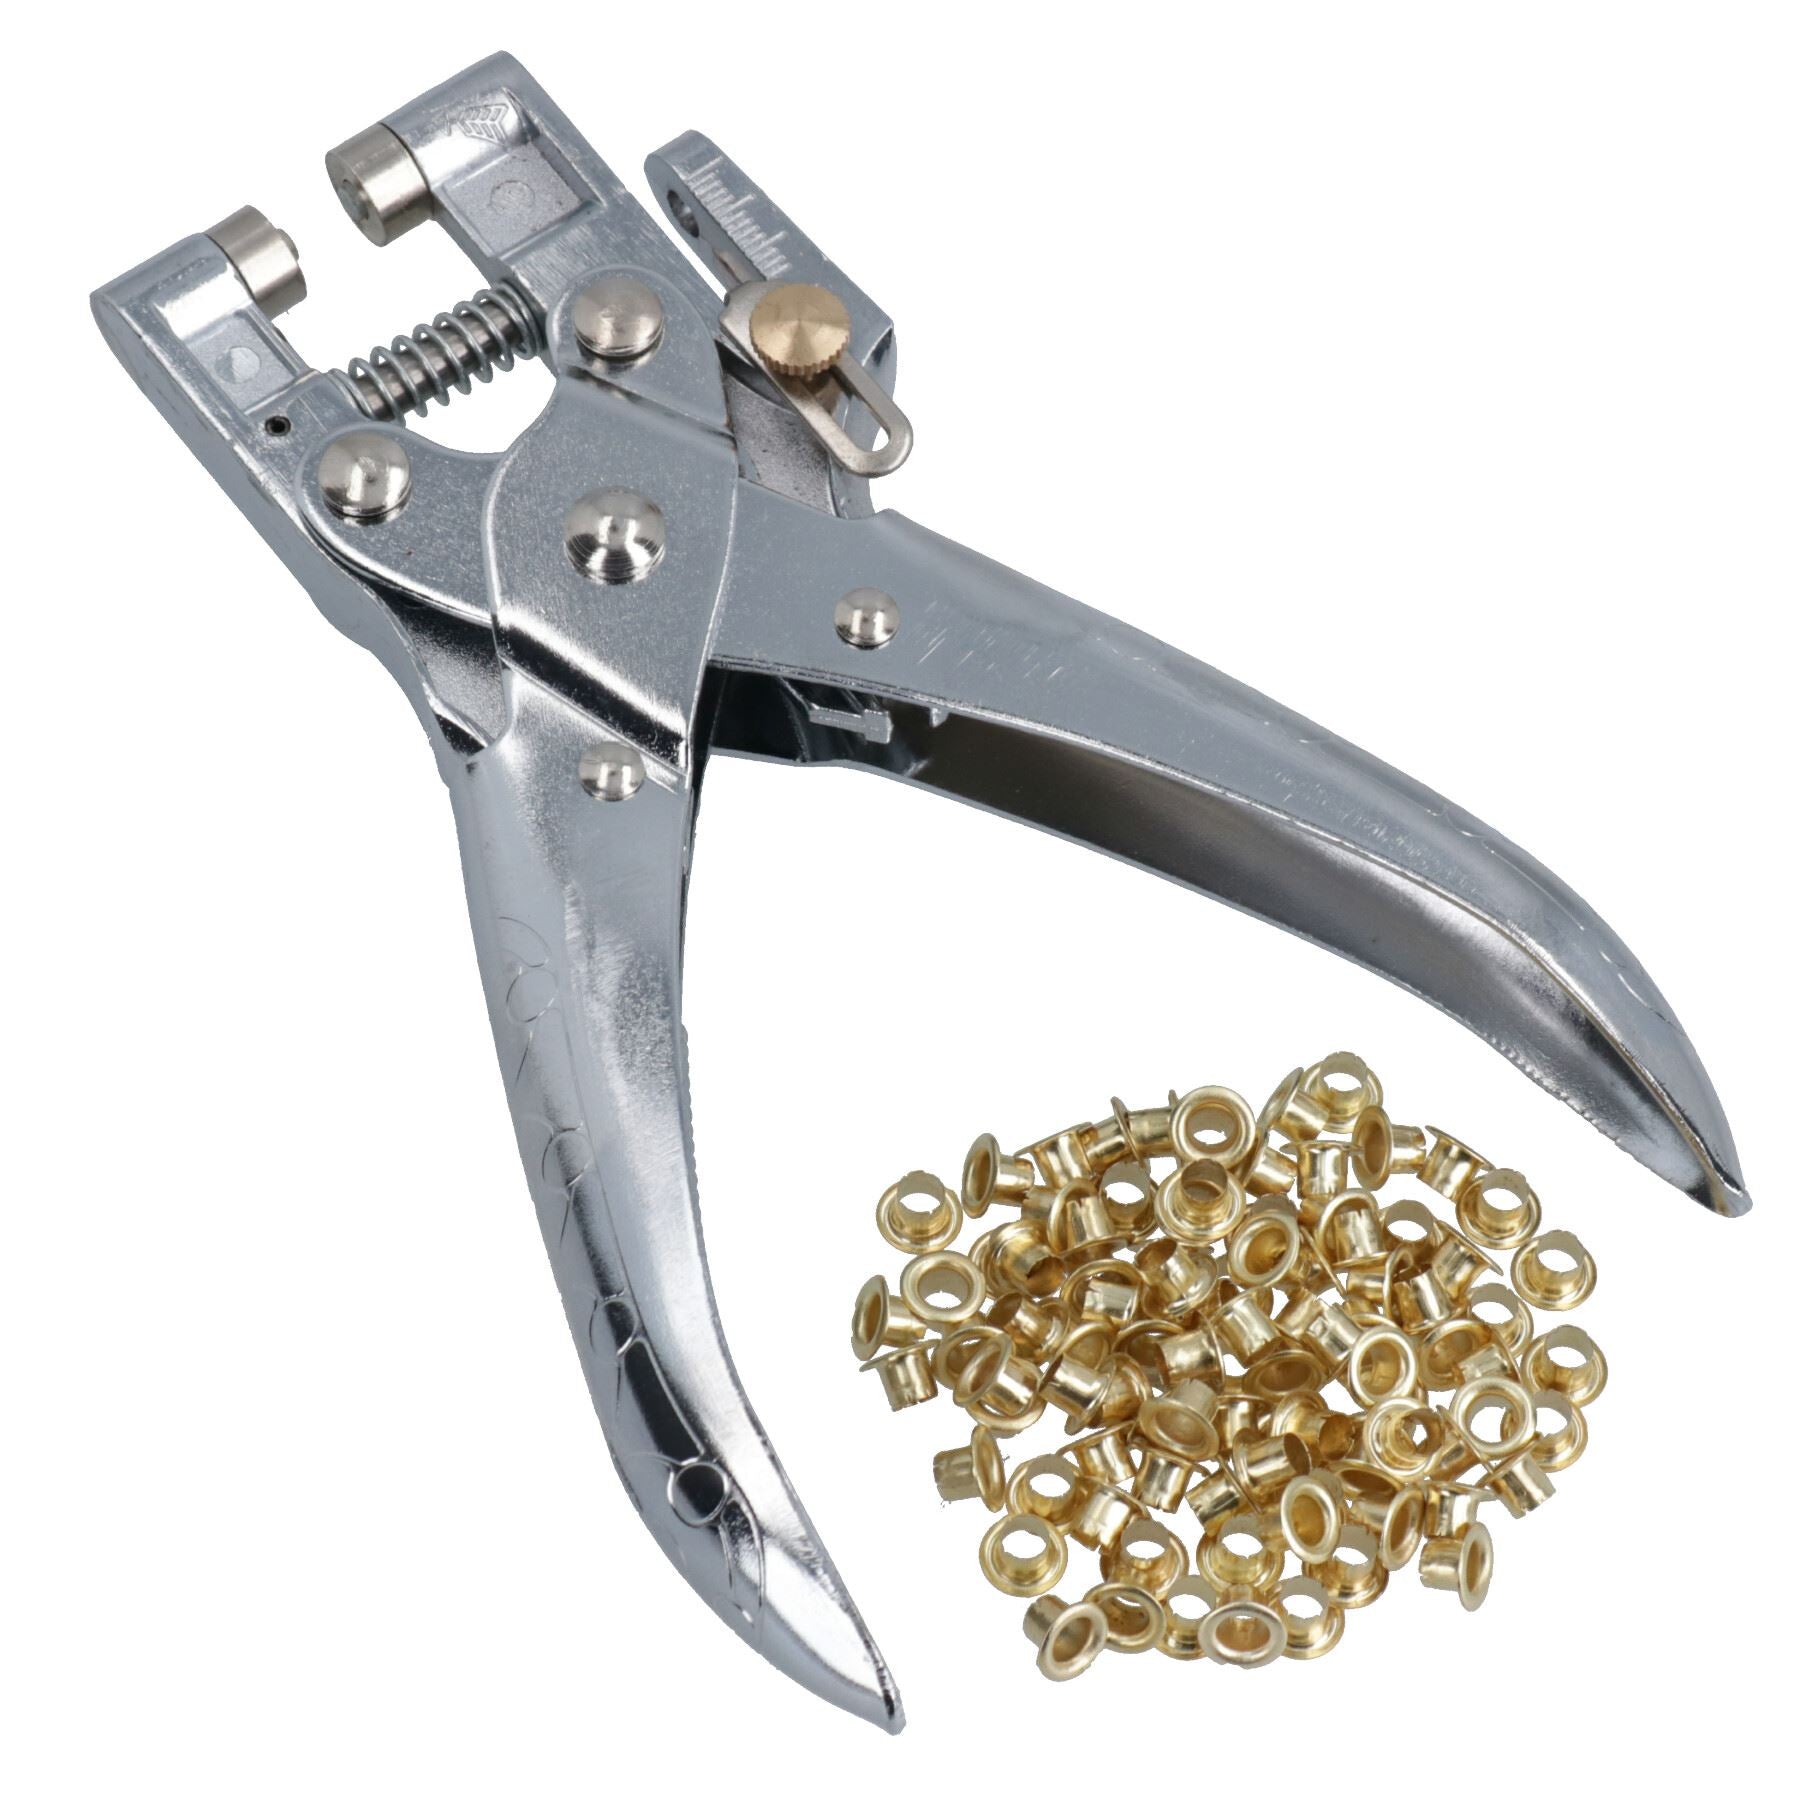 Heavy duty eyelet plier and 100 eyelets for tarpaulins / sheets / covers TE446